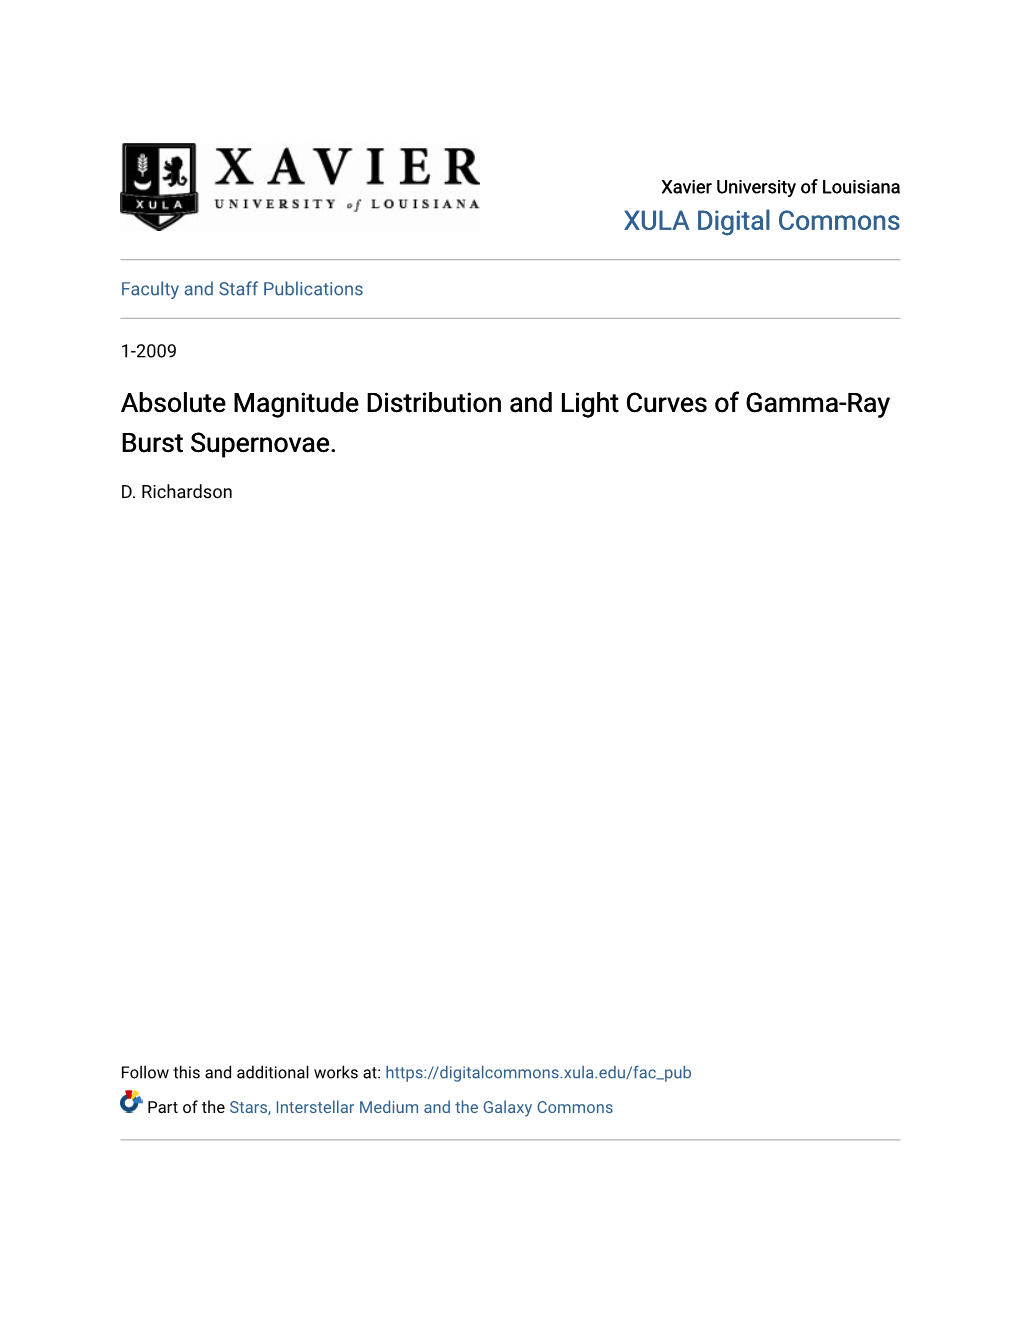 Absolute Magnitude Distribution and Light Curves of Gamma-Ray Burst Supernovae